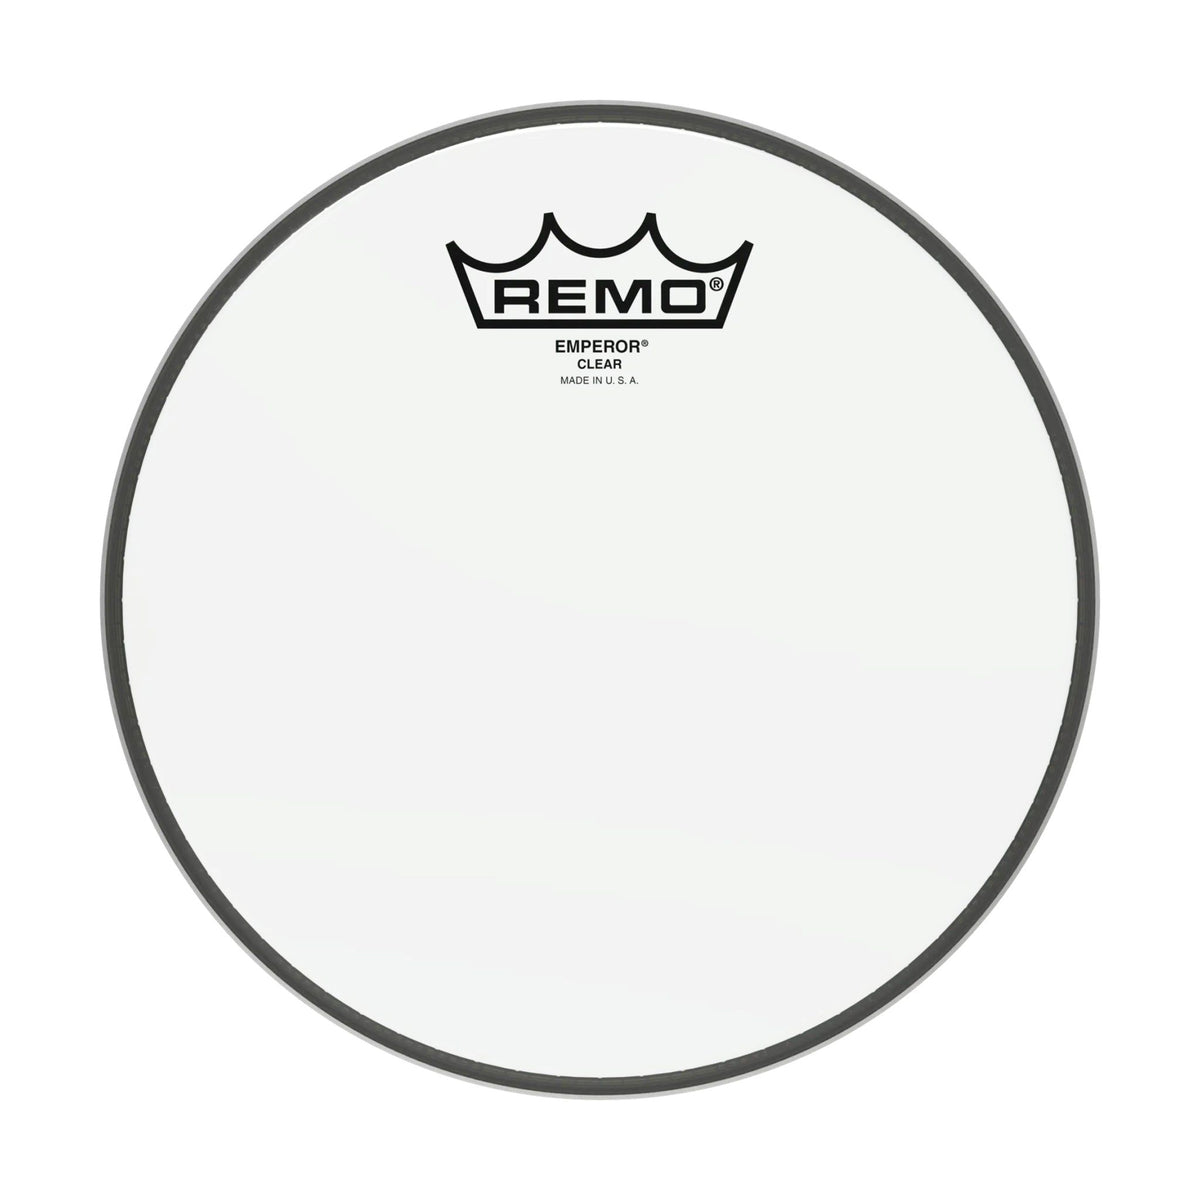 Remo Emperor 8 Inch Clear Drumhead BE-0308-00